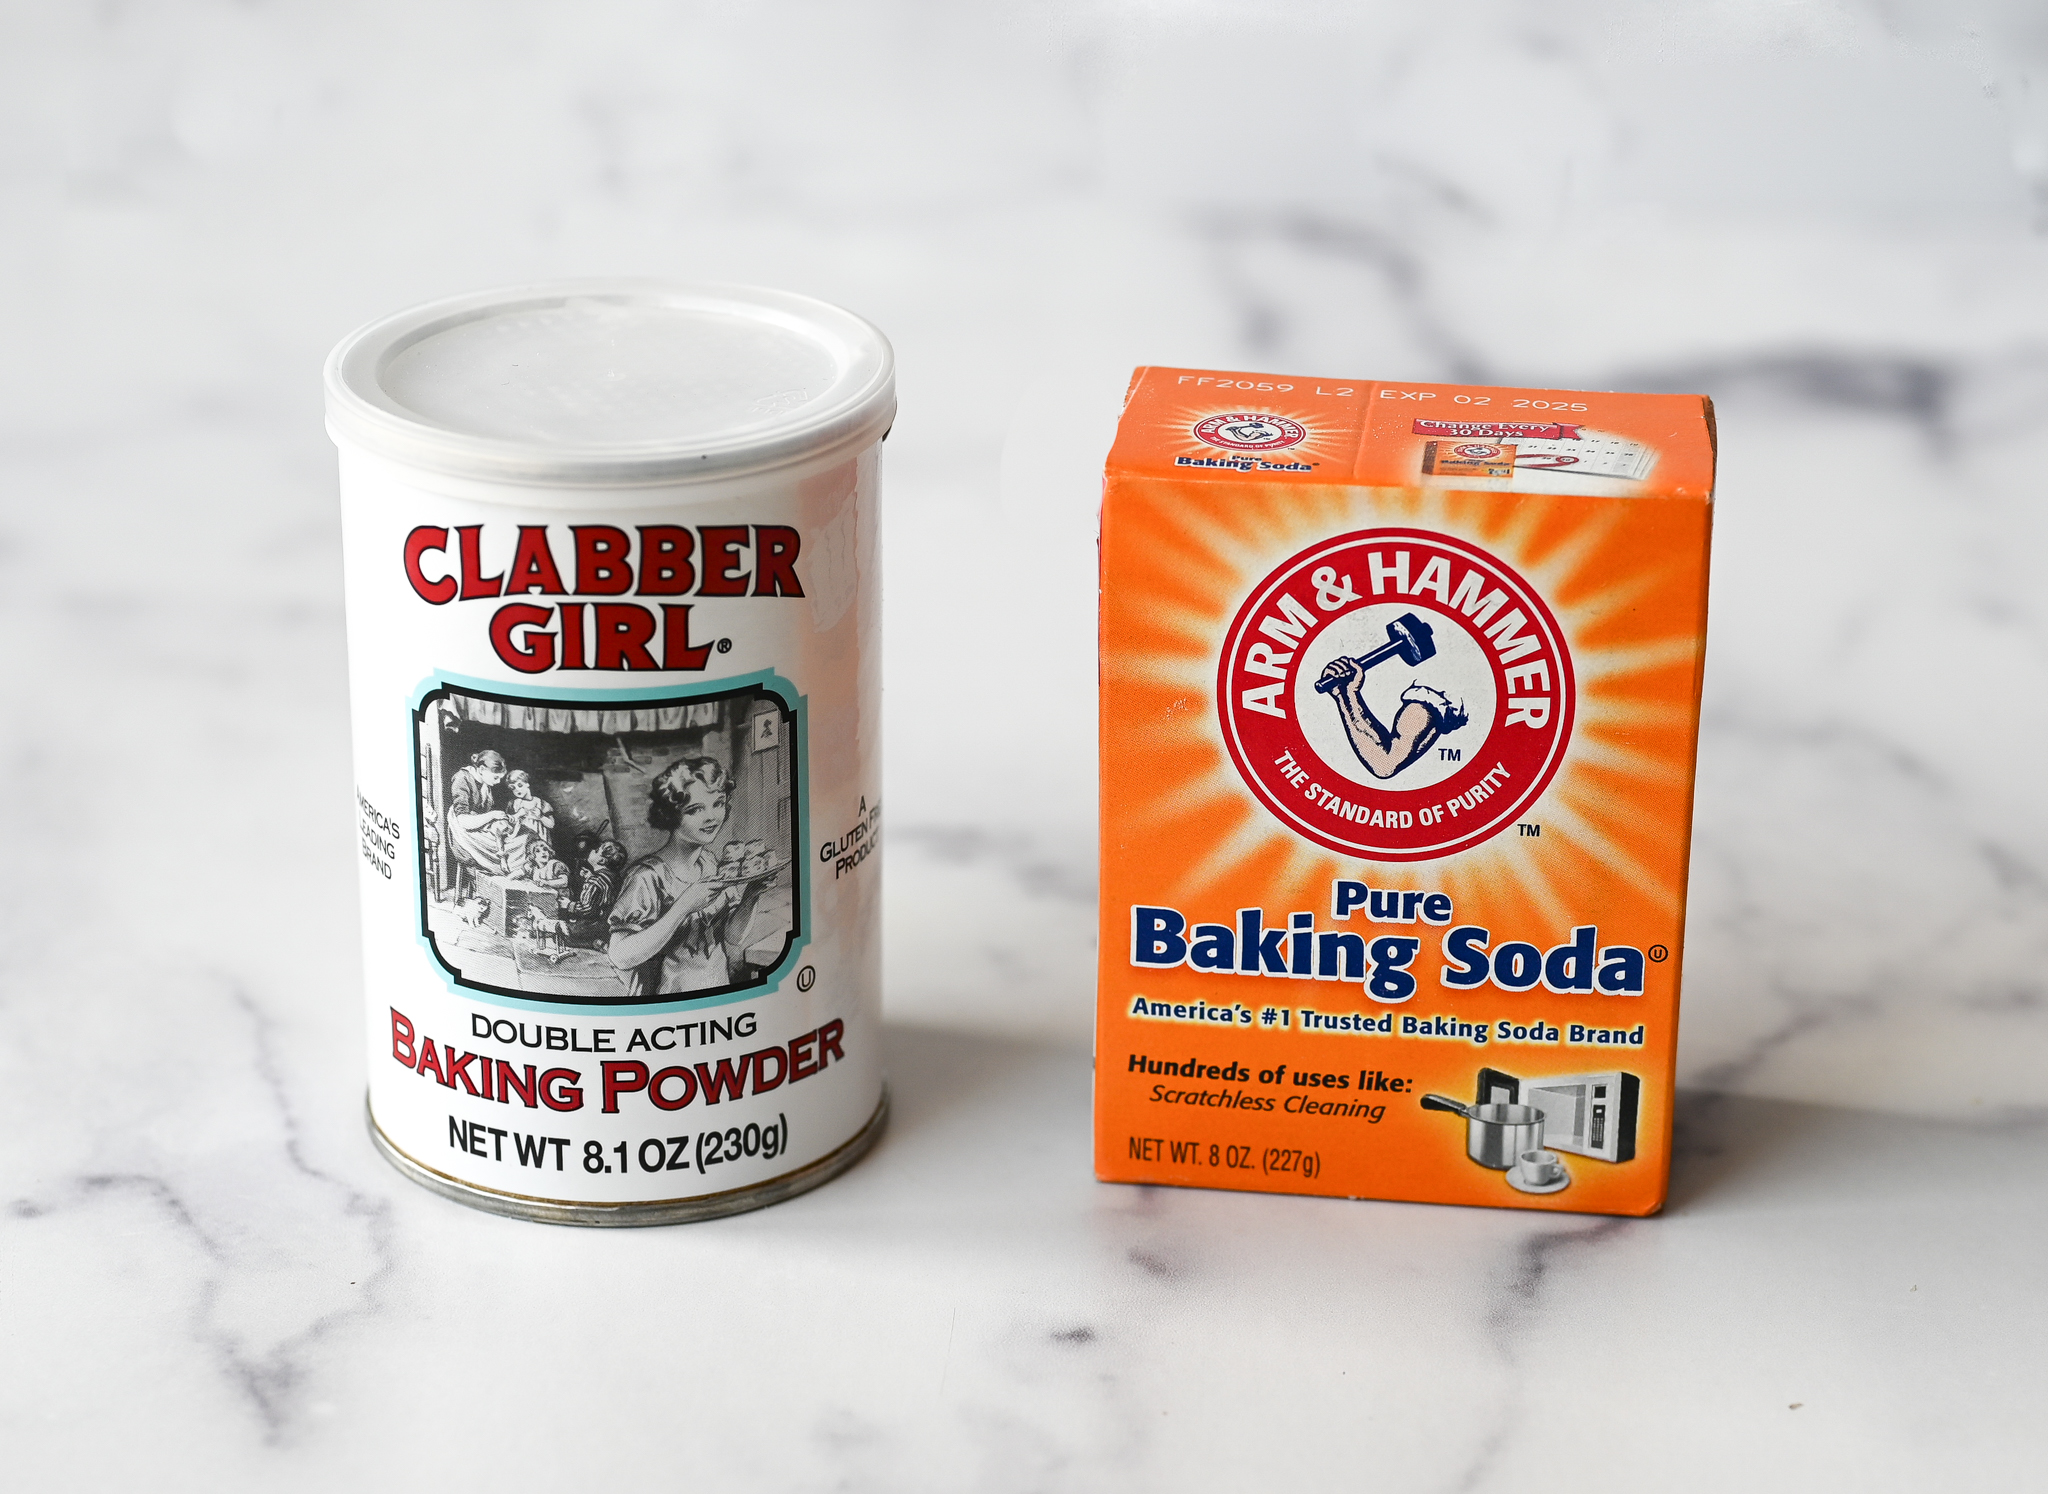 What's the difference between baking soda and baking powder?